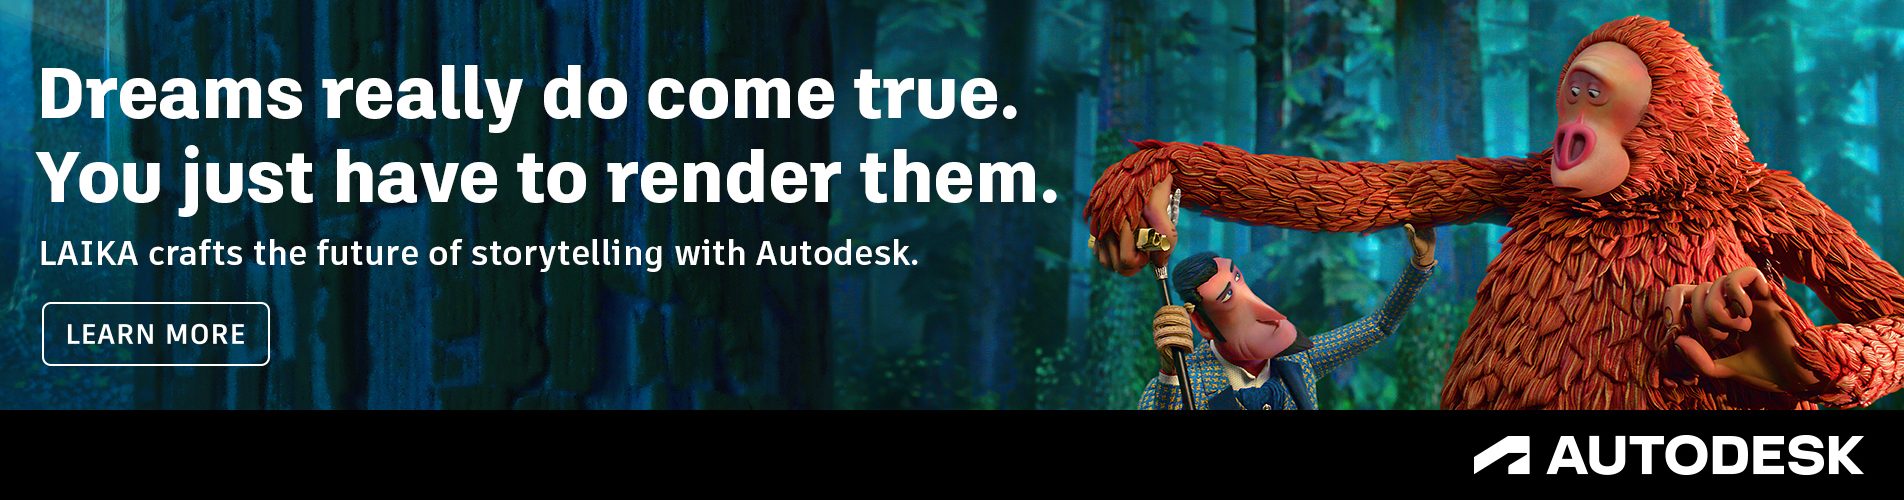 Example of an Autodesk banner with text saying Dreams really do come true. You just have to render with a CGI cartoon of an ape and a man